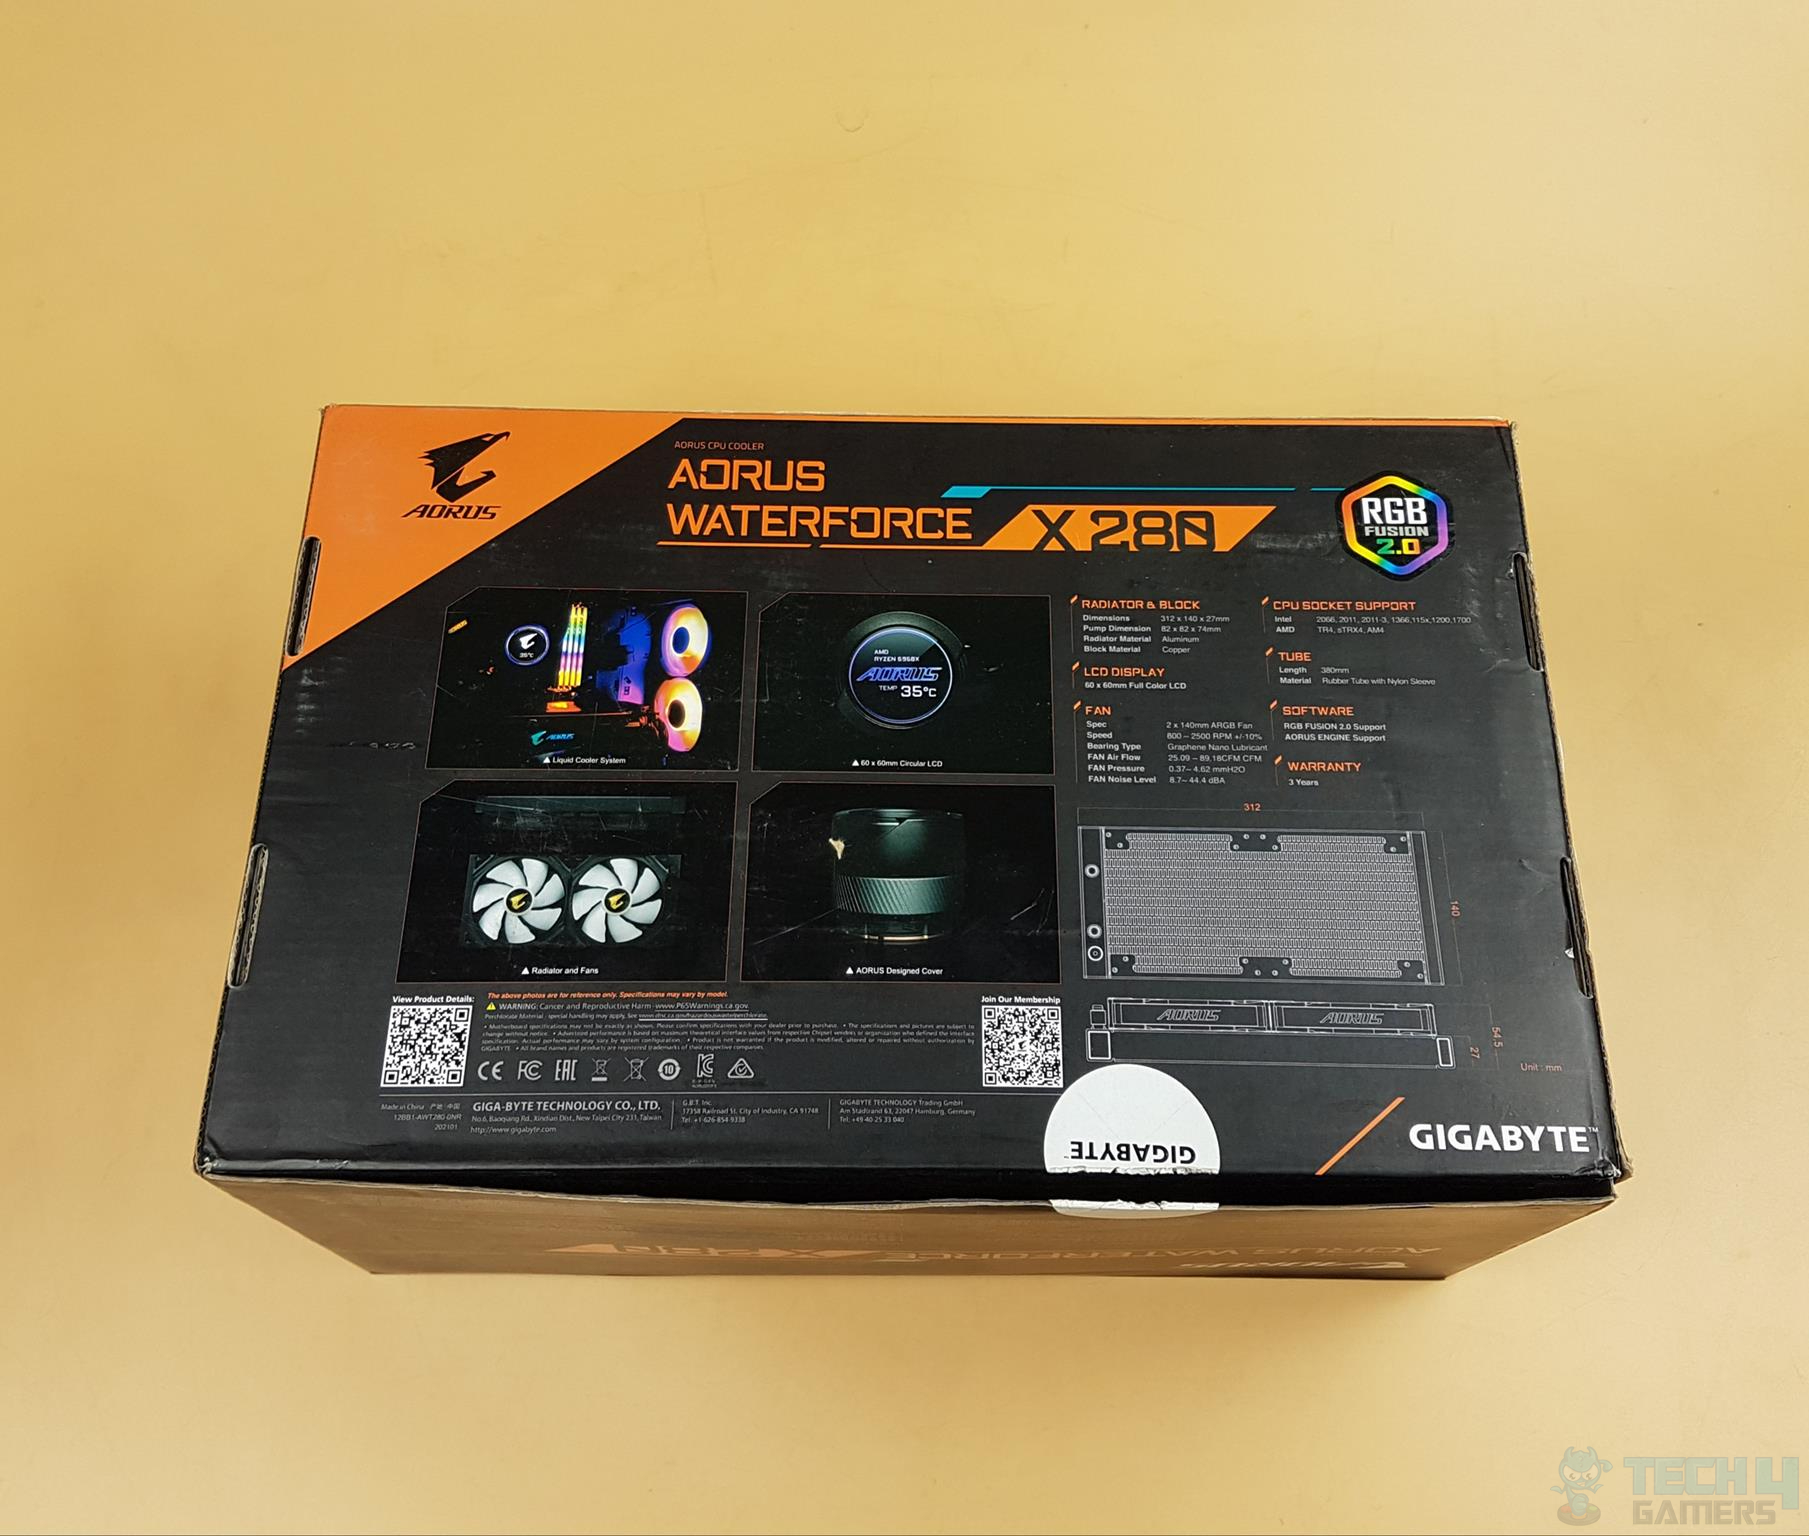 AORUS WATERFORCE X 280 Back view of Box